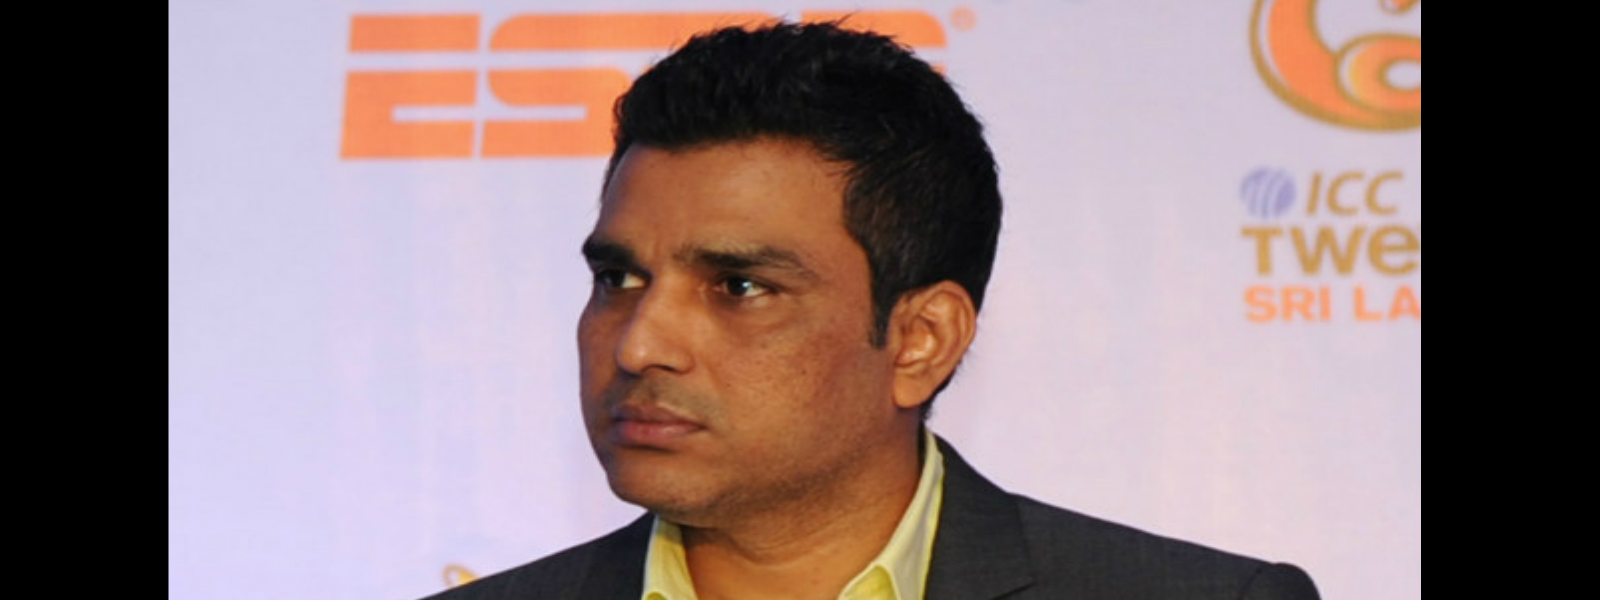 Manjrekar's views on the ball tampering incident